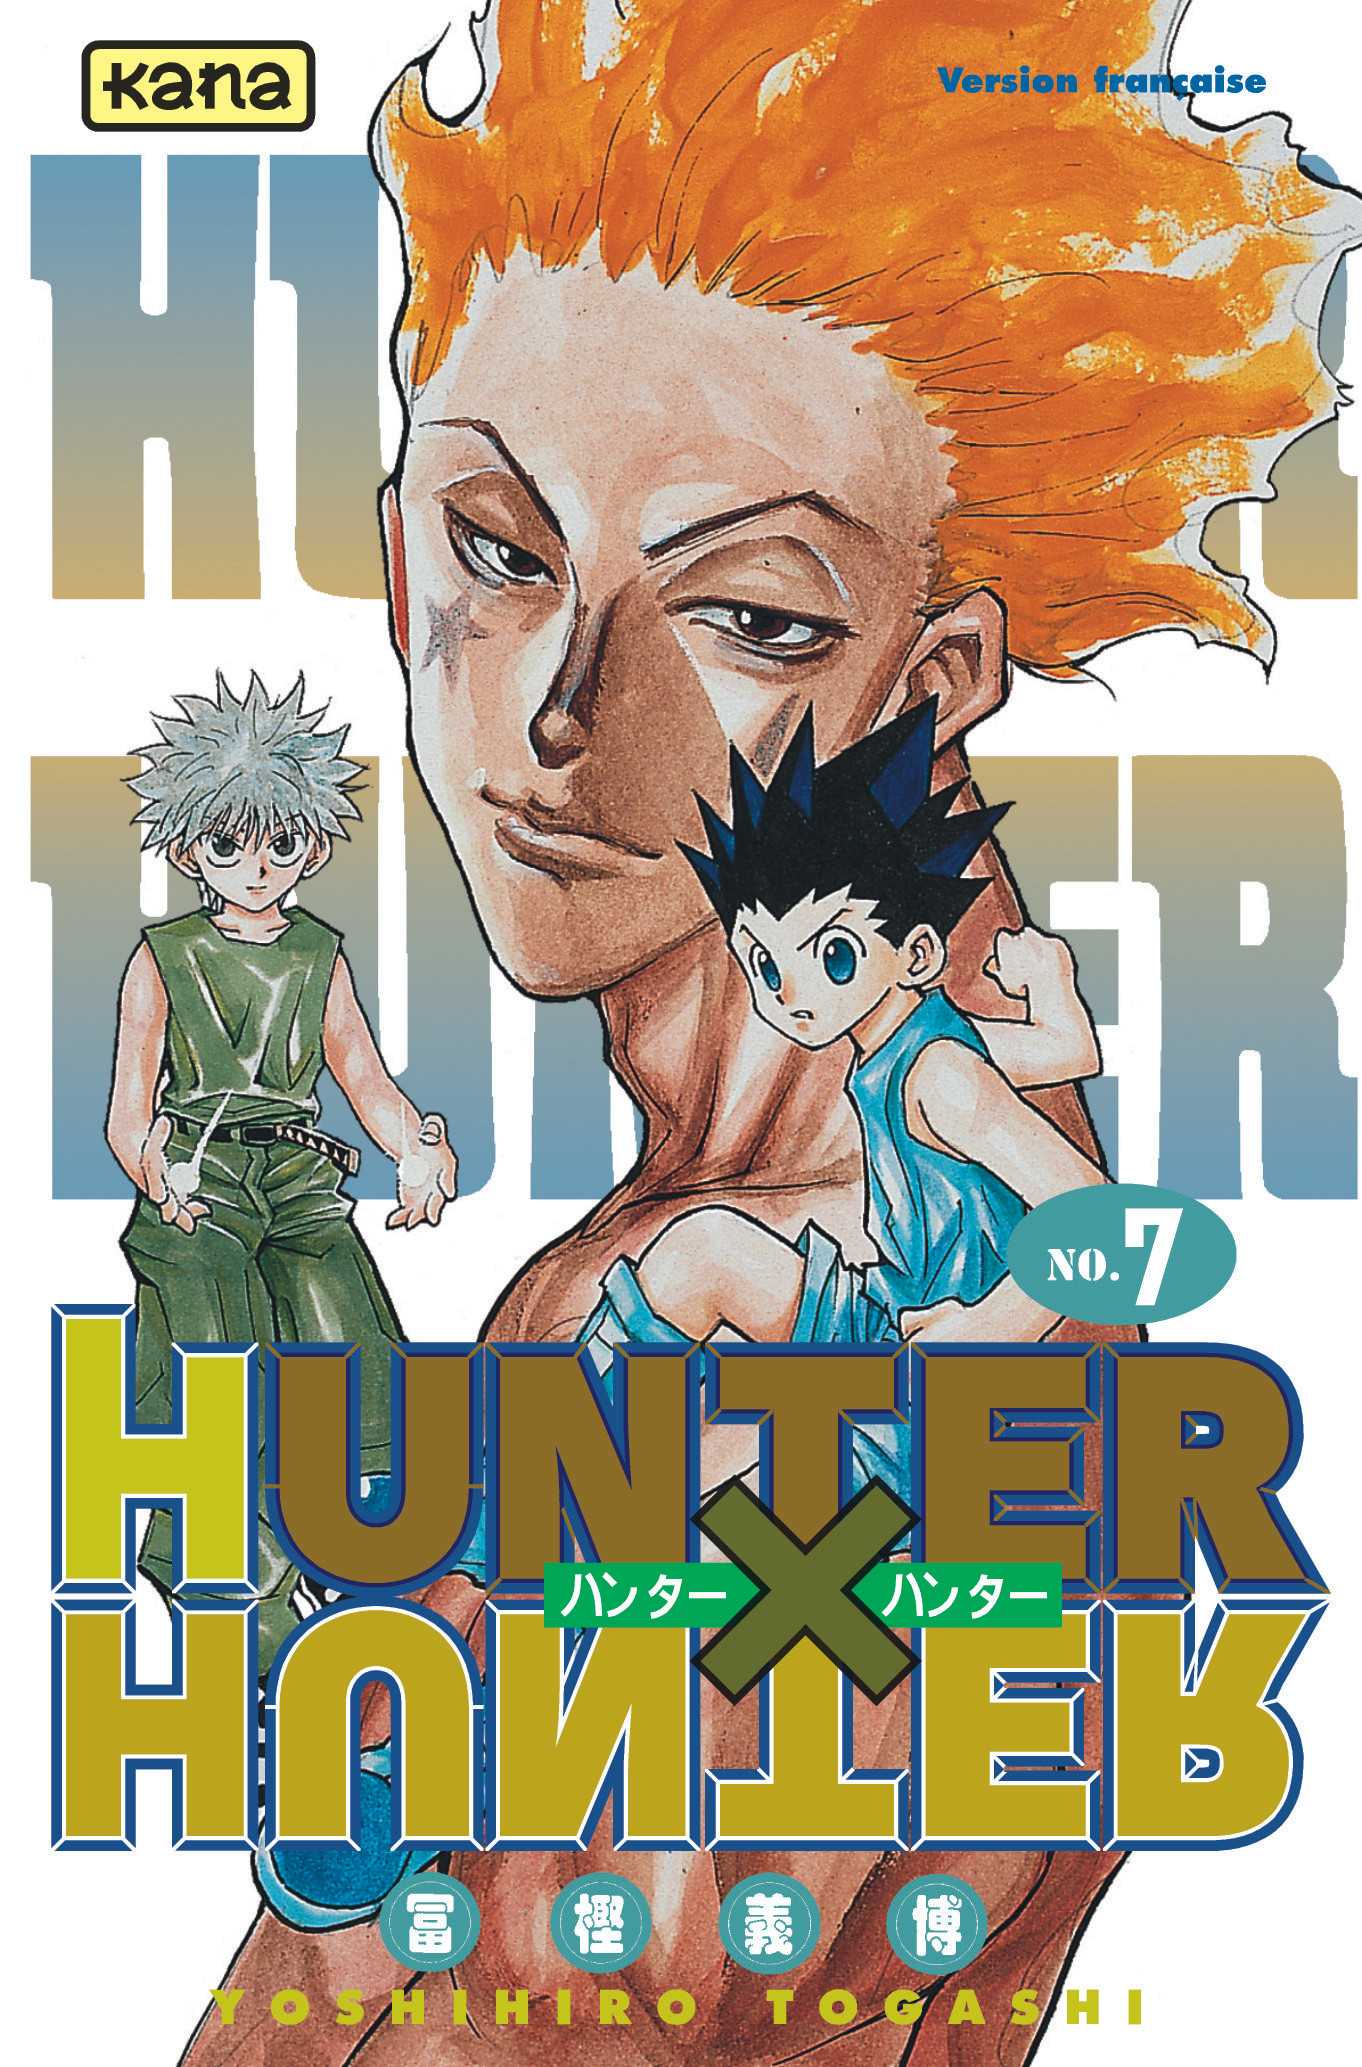 Couverture Tome 7 - HUNTER X HUNTER © POT (Yoshihiro Togashi) 1998-2018. All rights reserved.